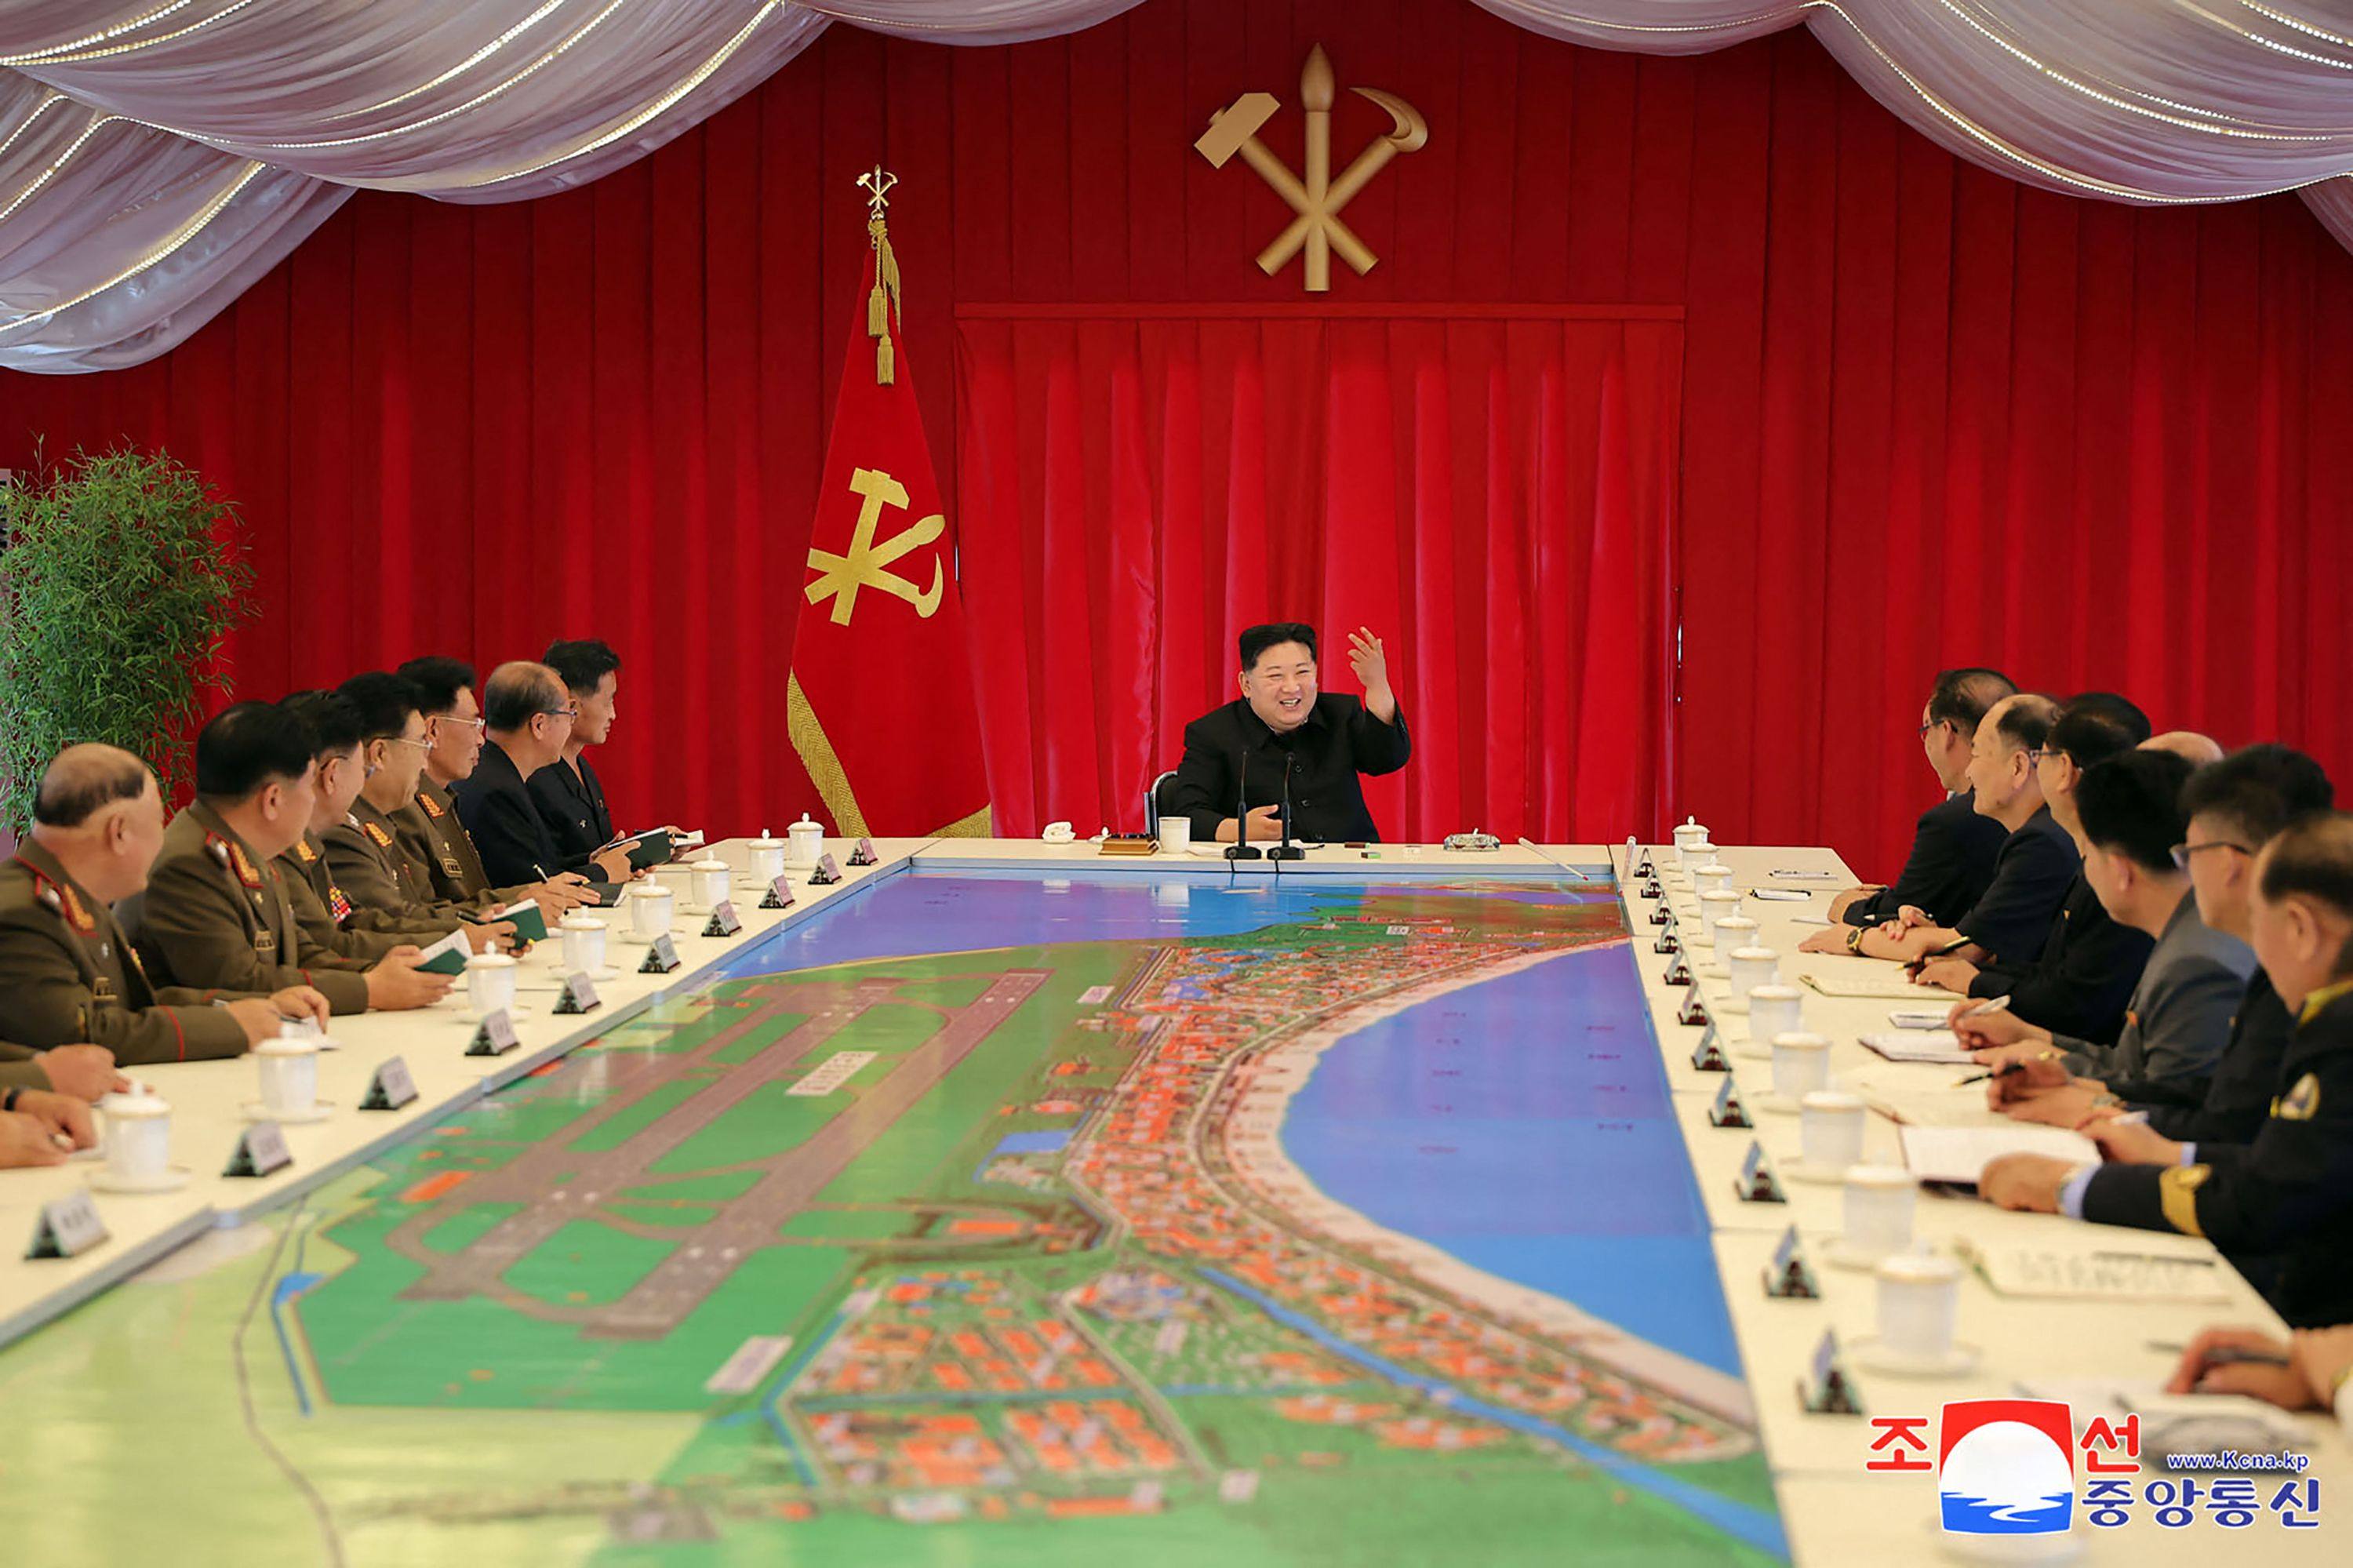 North Korean leader Kim Jong-un attends a conference at the Wonsan Kalma coast tourist area, which is currently under construction in North Korea’s Gangwon Province. Photo: KCNA via KNS/AFP